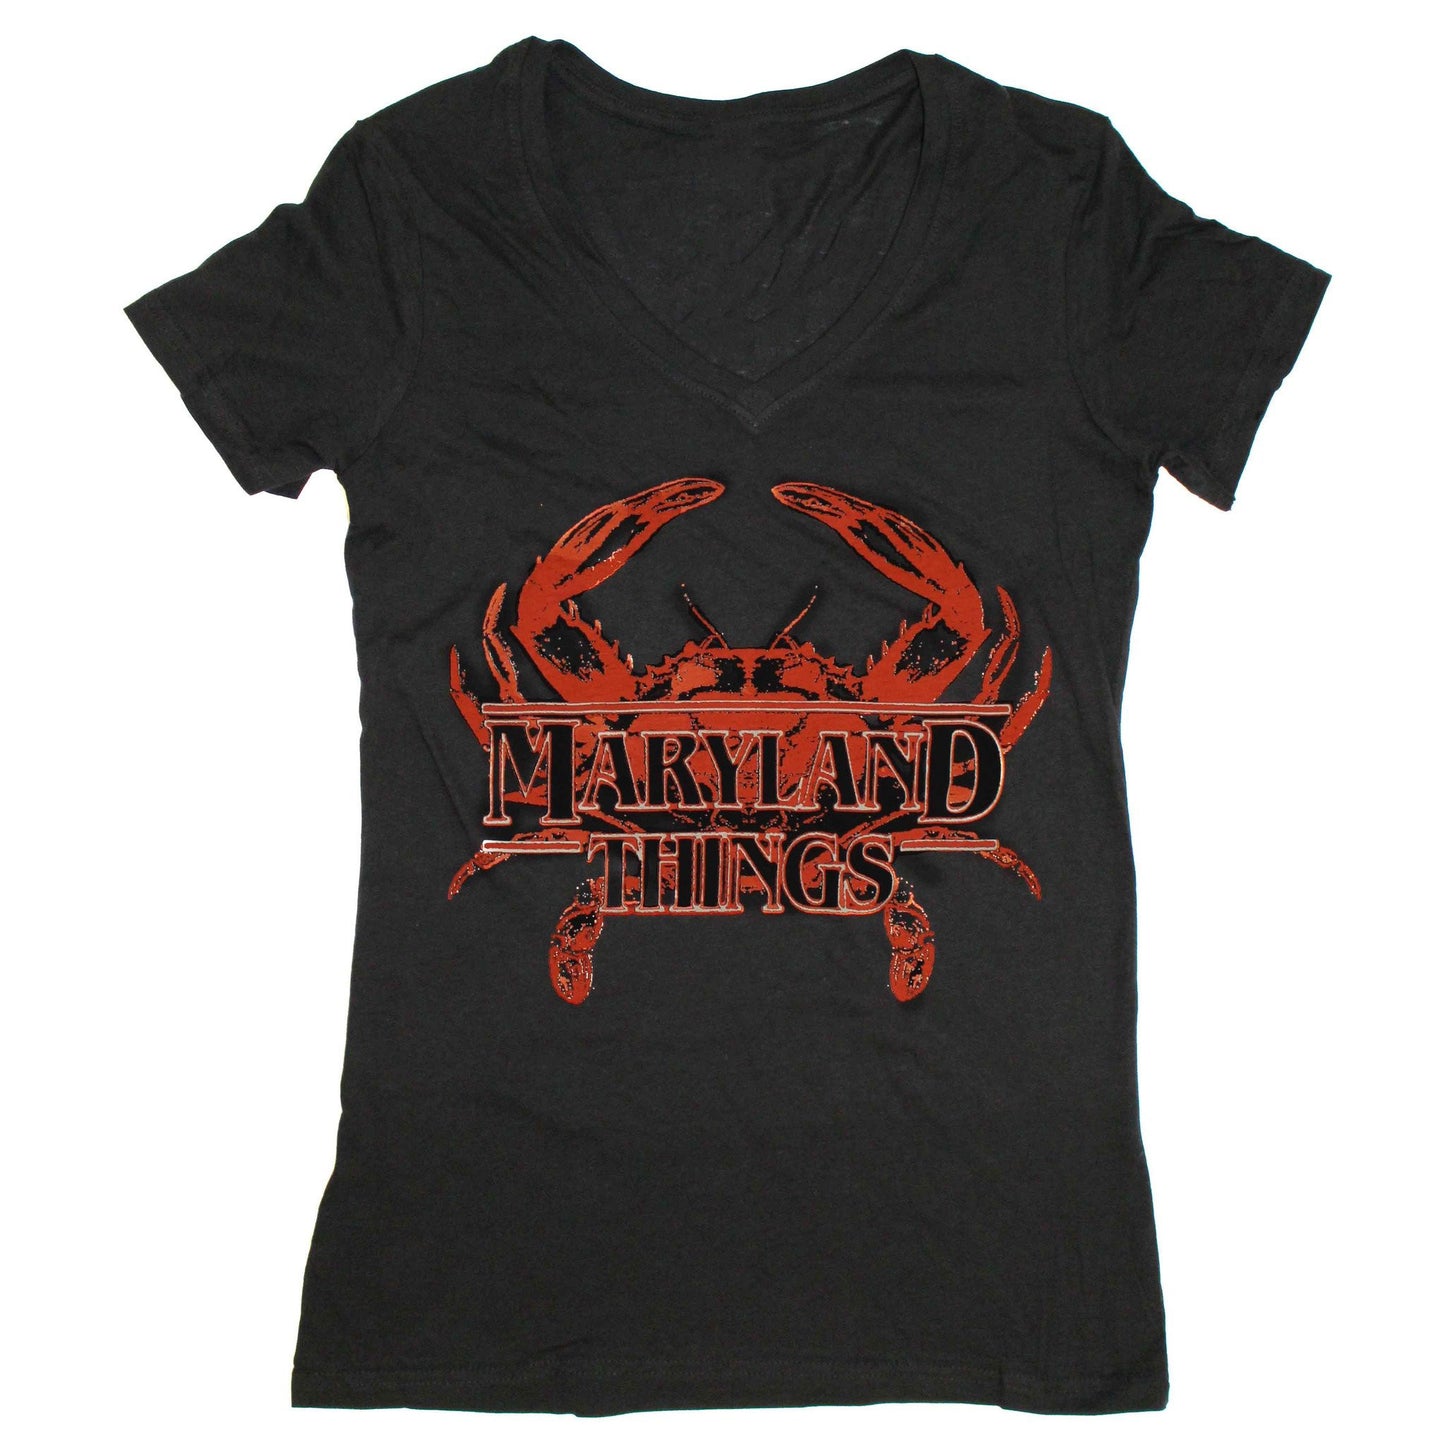 Maryland Things (Black) / Ladies V-Neck Shirt - Route One Apparel